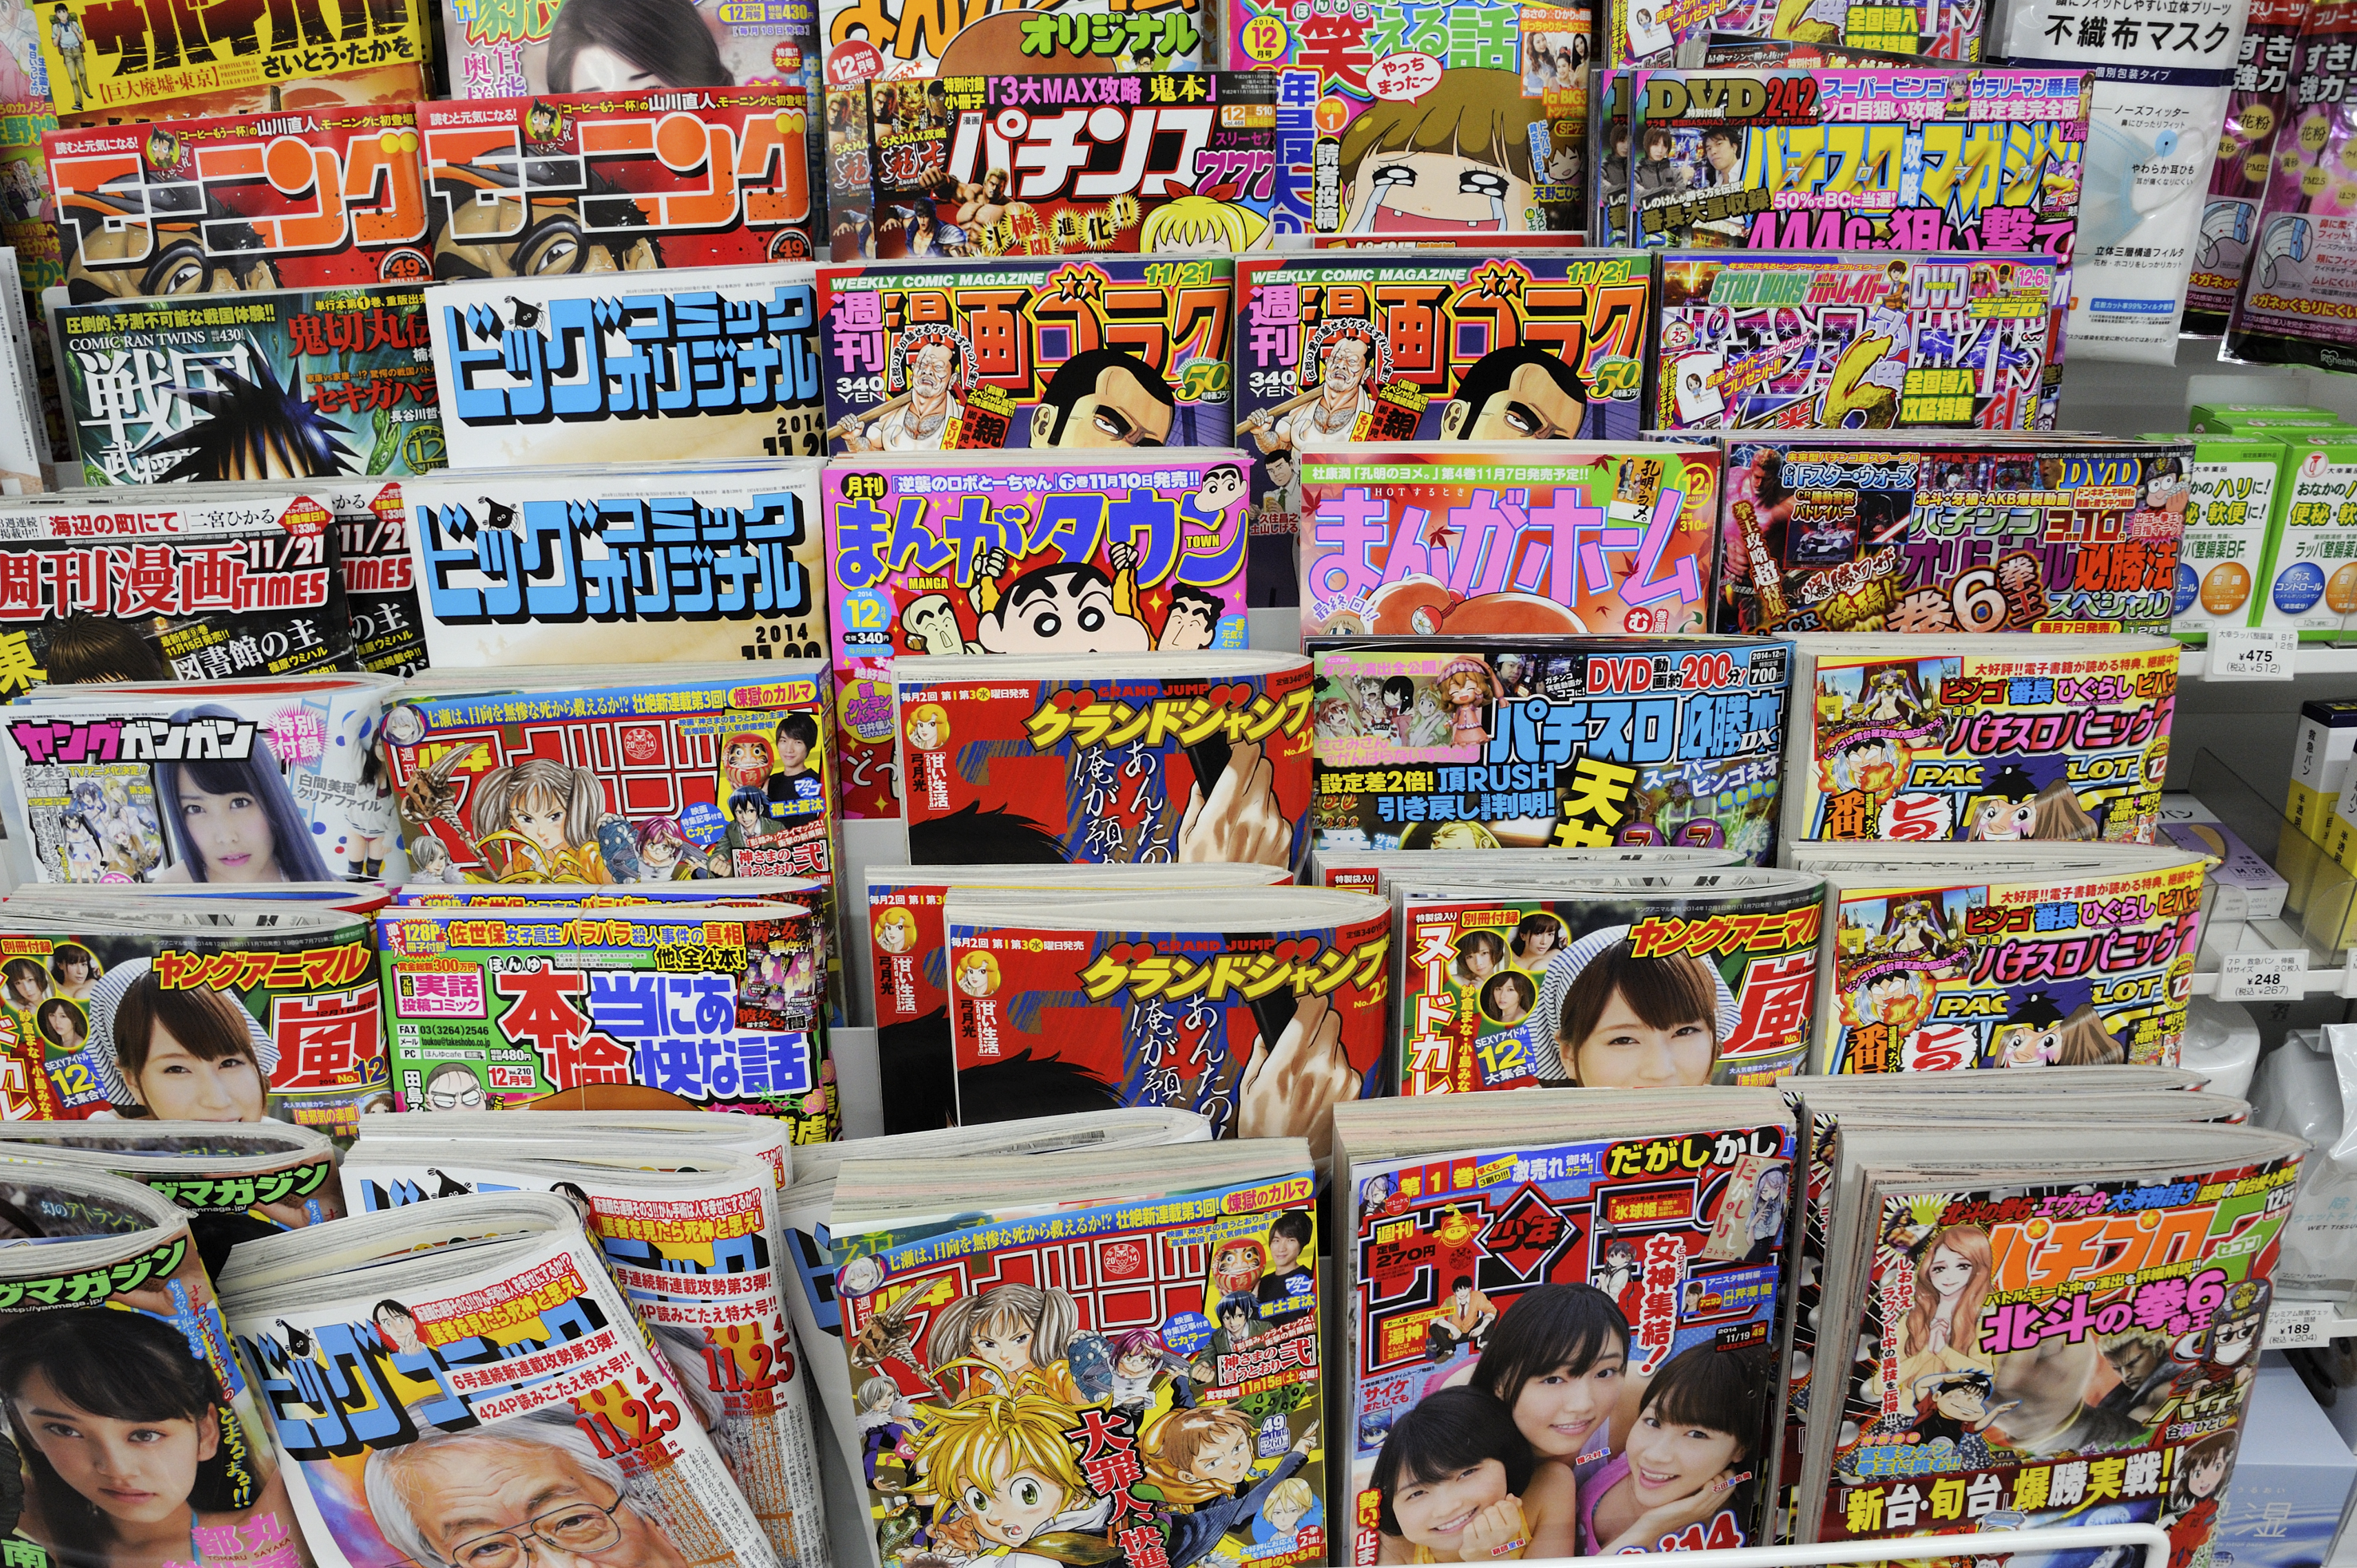 Japanese city seeks to cover up adult magazines in convenience stores - The  Japan Times